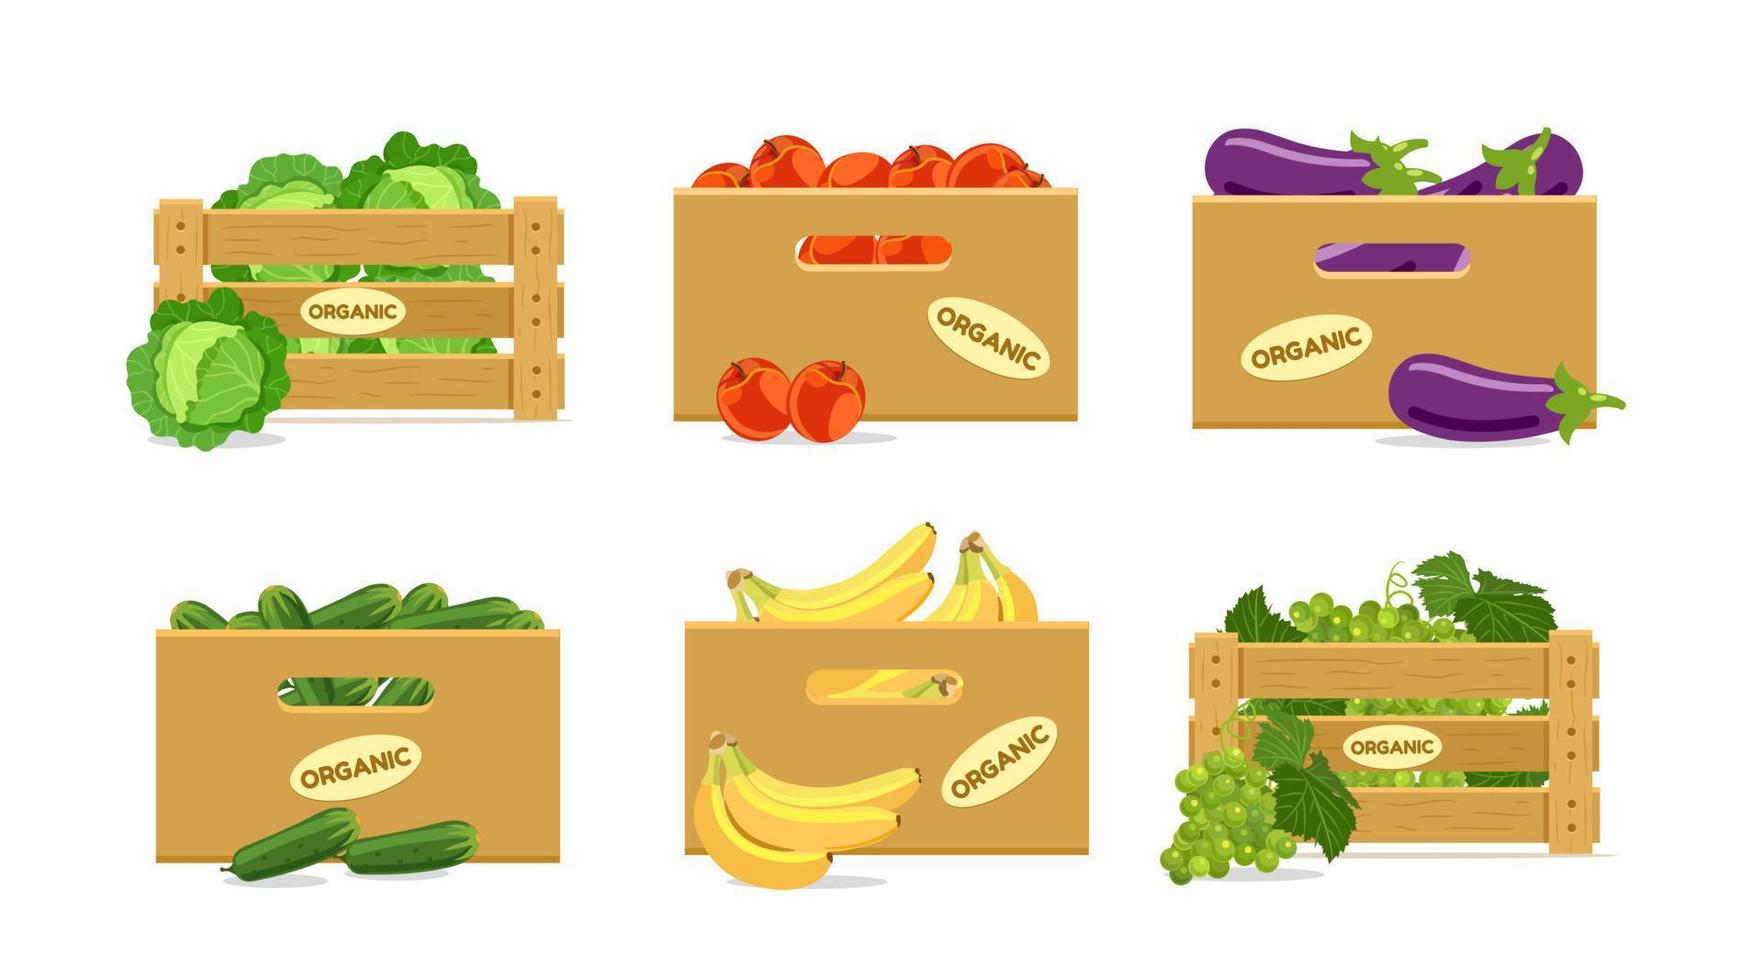 Set of boxes with fruits and vegetables. With cabbage, apples, eggplants, cucumbers, bananas, grapes. Vector illustration isolated on white background.